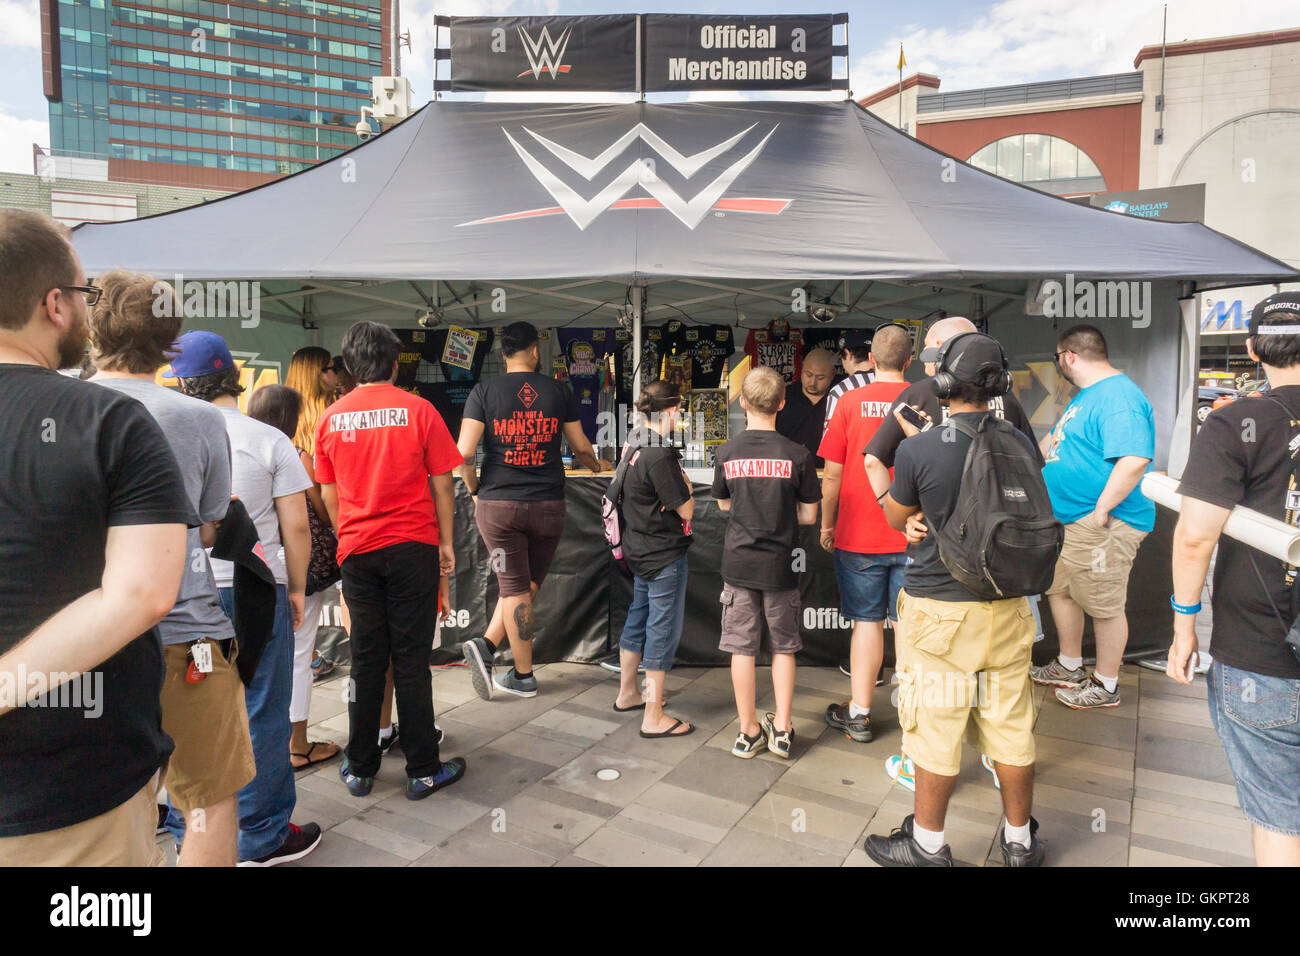 Wrestling fans buy souvenirs and other memorabilia prior to the WWE SummerSlam event at the Barclays Center in Brooklyn in New York on Saturday, August 20, 2016.  (© Richard B. Levine) Stock Photo